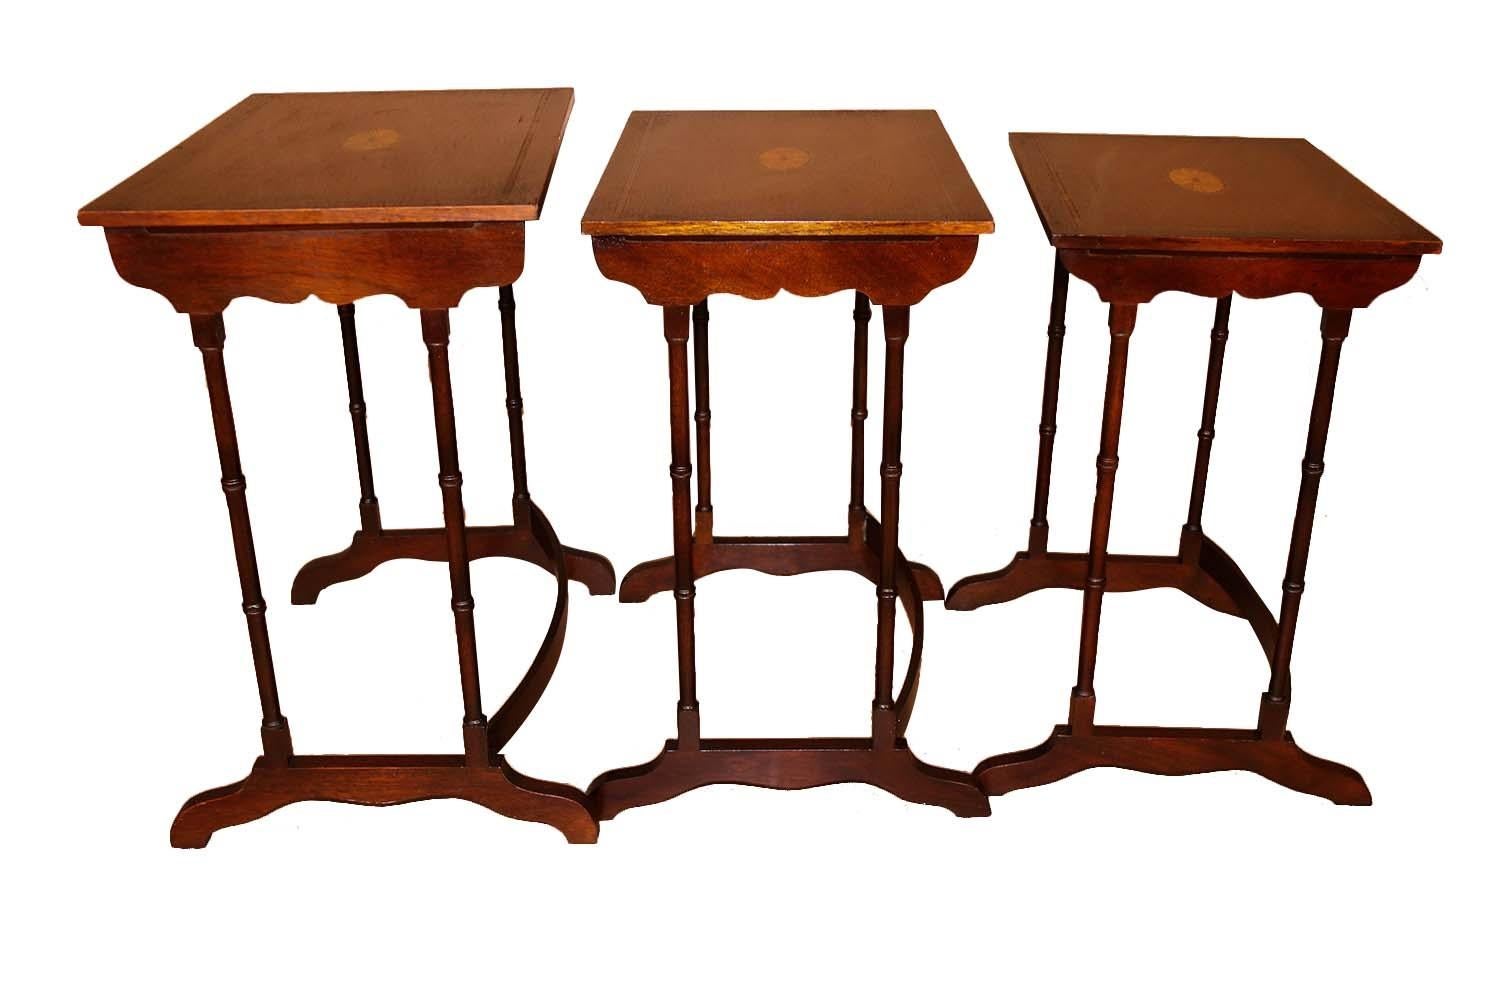 20th Century Federal Style Mahogany Satinwood Nesting Tables